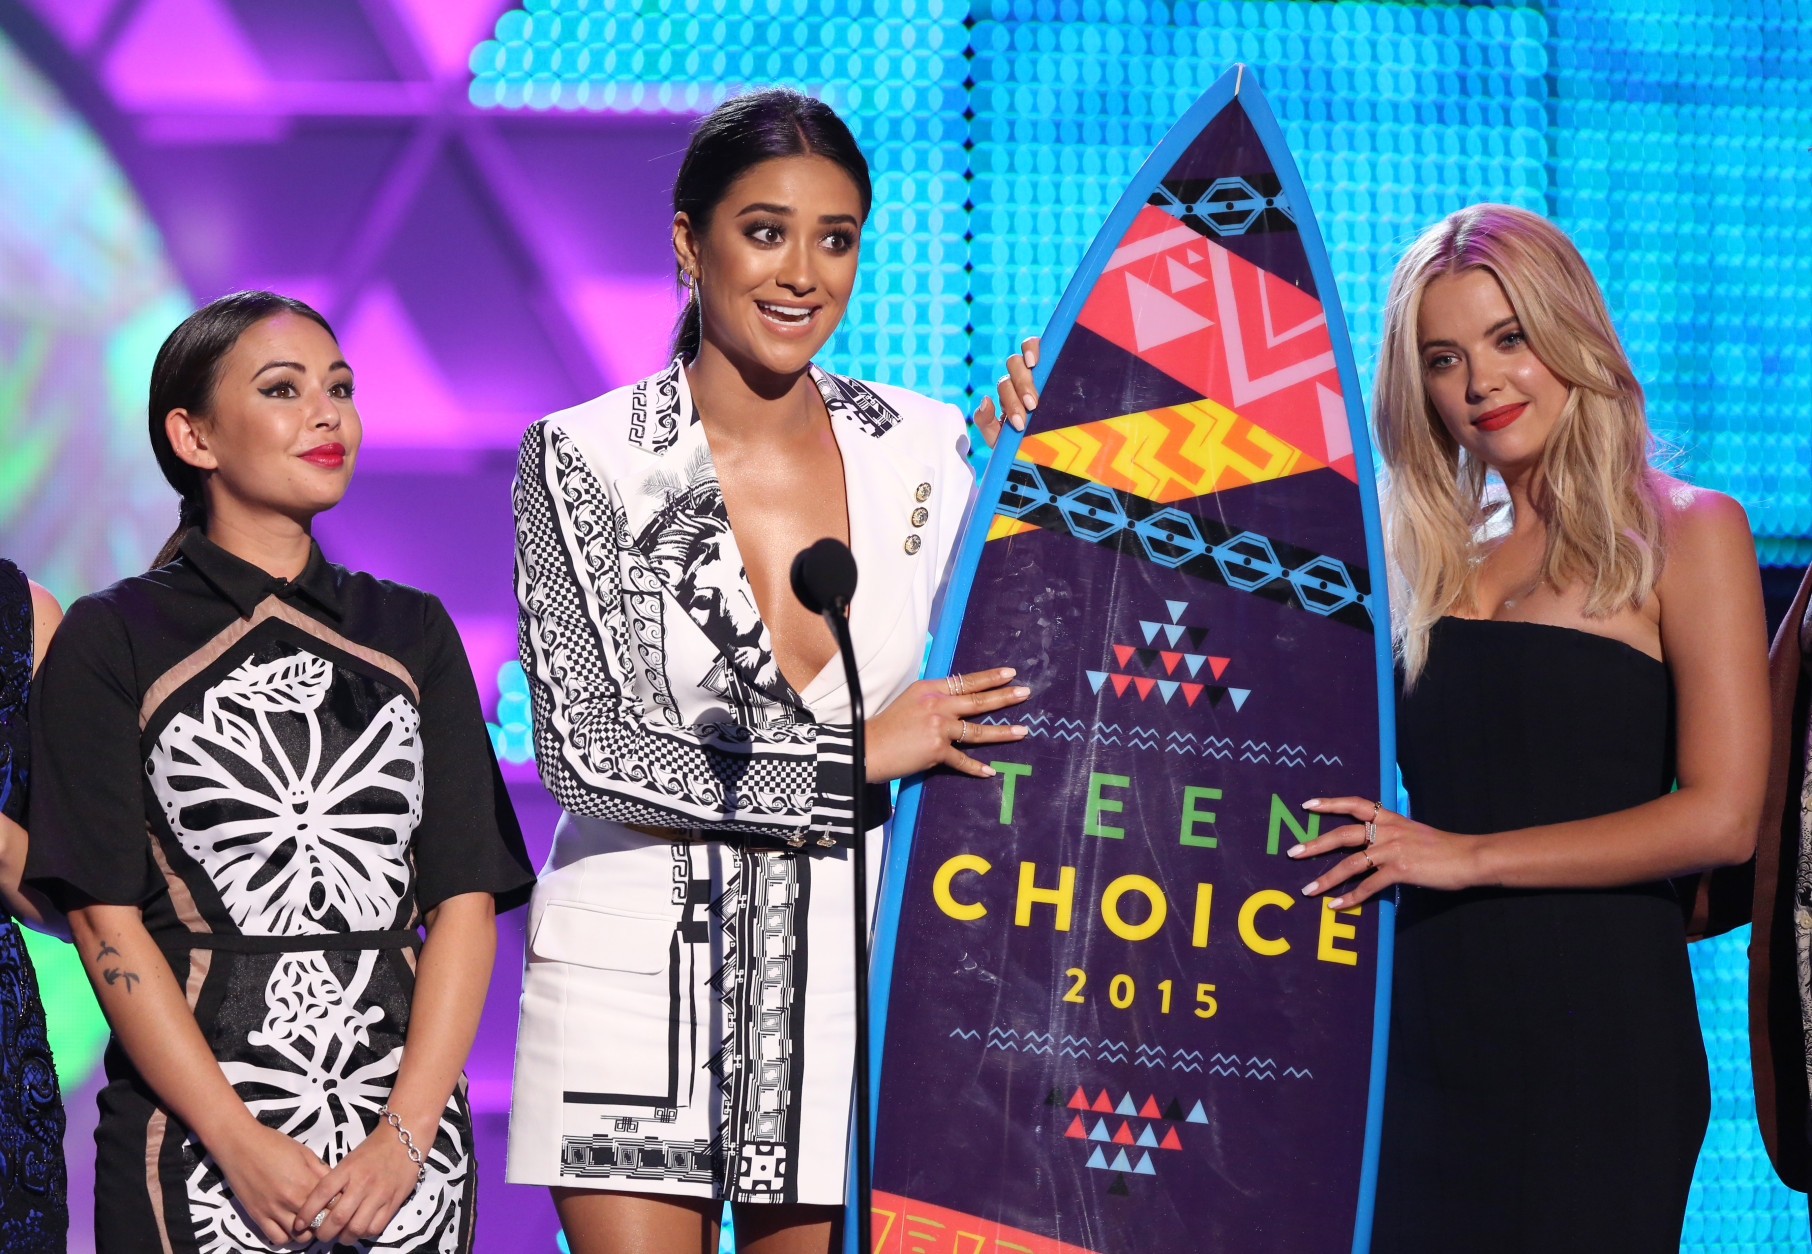 Janel Parrish, from left, Shay Mitchell and Ashley Benson accept the award for choice TV: drama show for "Pretty Little Liars" at the Teen Choice Awards at the Galen Center on Sunday, Aug. 16, 2015, in Los Angeles. (Photo by Matt Sayles/Invision/AP)